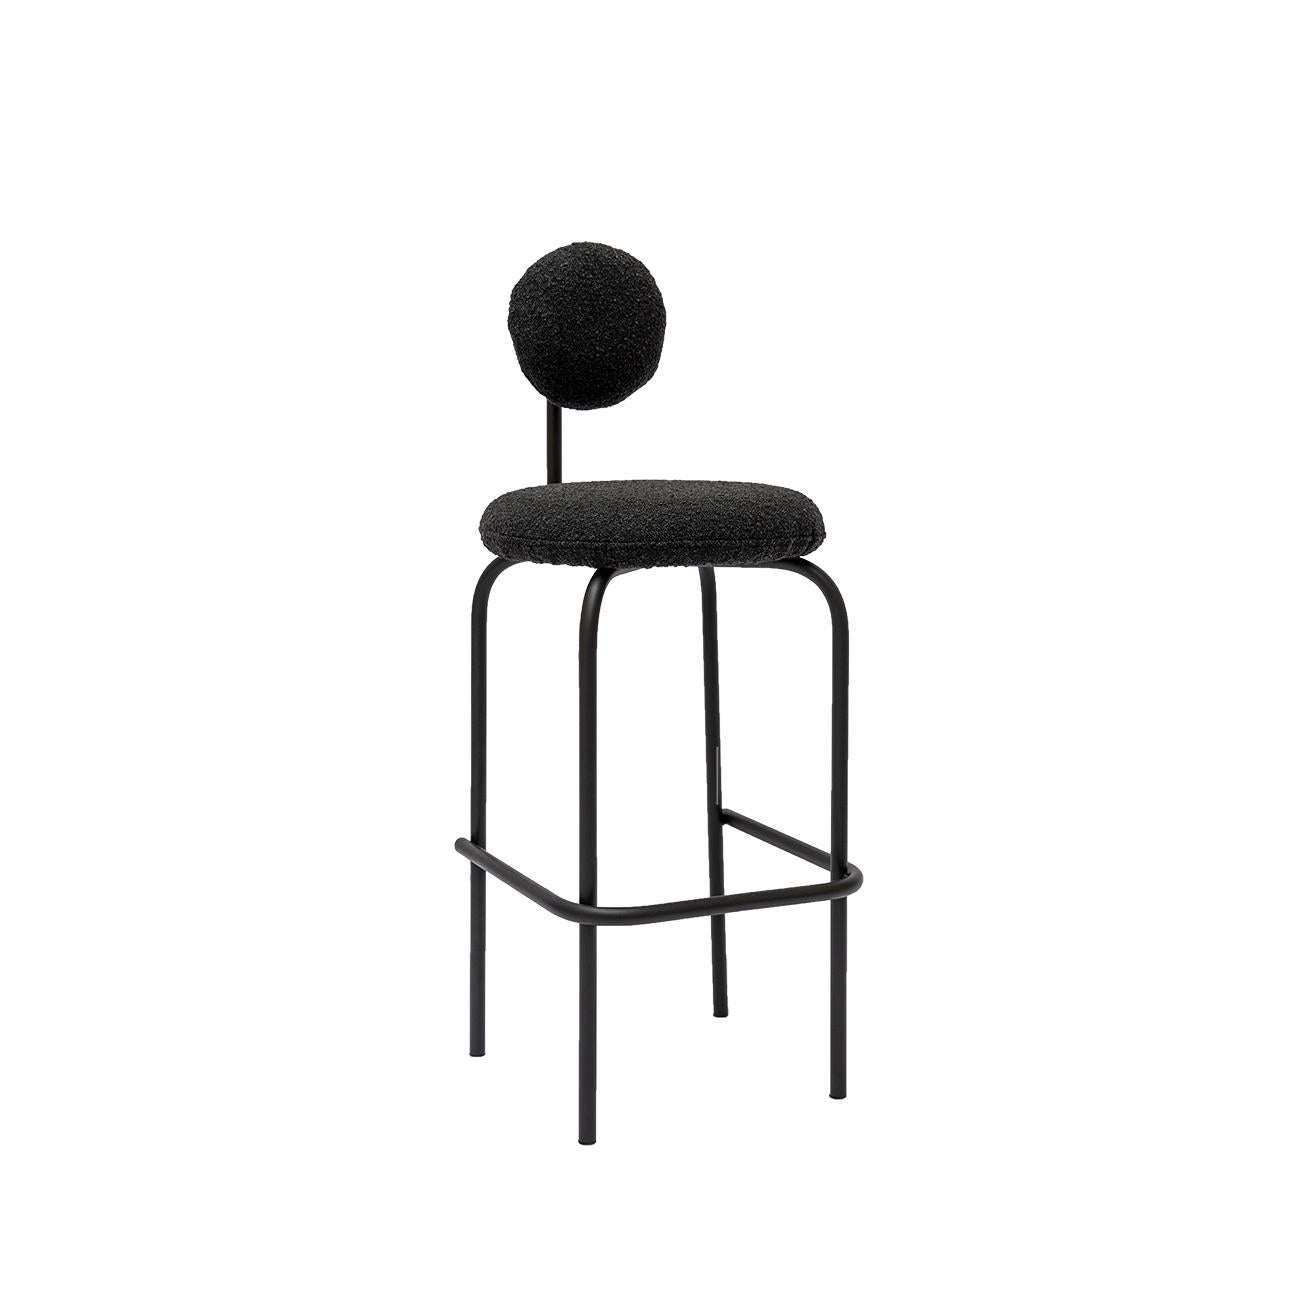 Object 092 Stool by NG Design
Dimensions: W 43 x D 50 x H 110 cm
Materials: Powder Coated Steel, Bouclé Fabric

Also Available: All of objects available in different materials and colors on demand.

The Object 092 Stool is the bigger brother of the